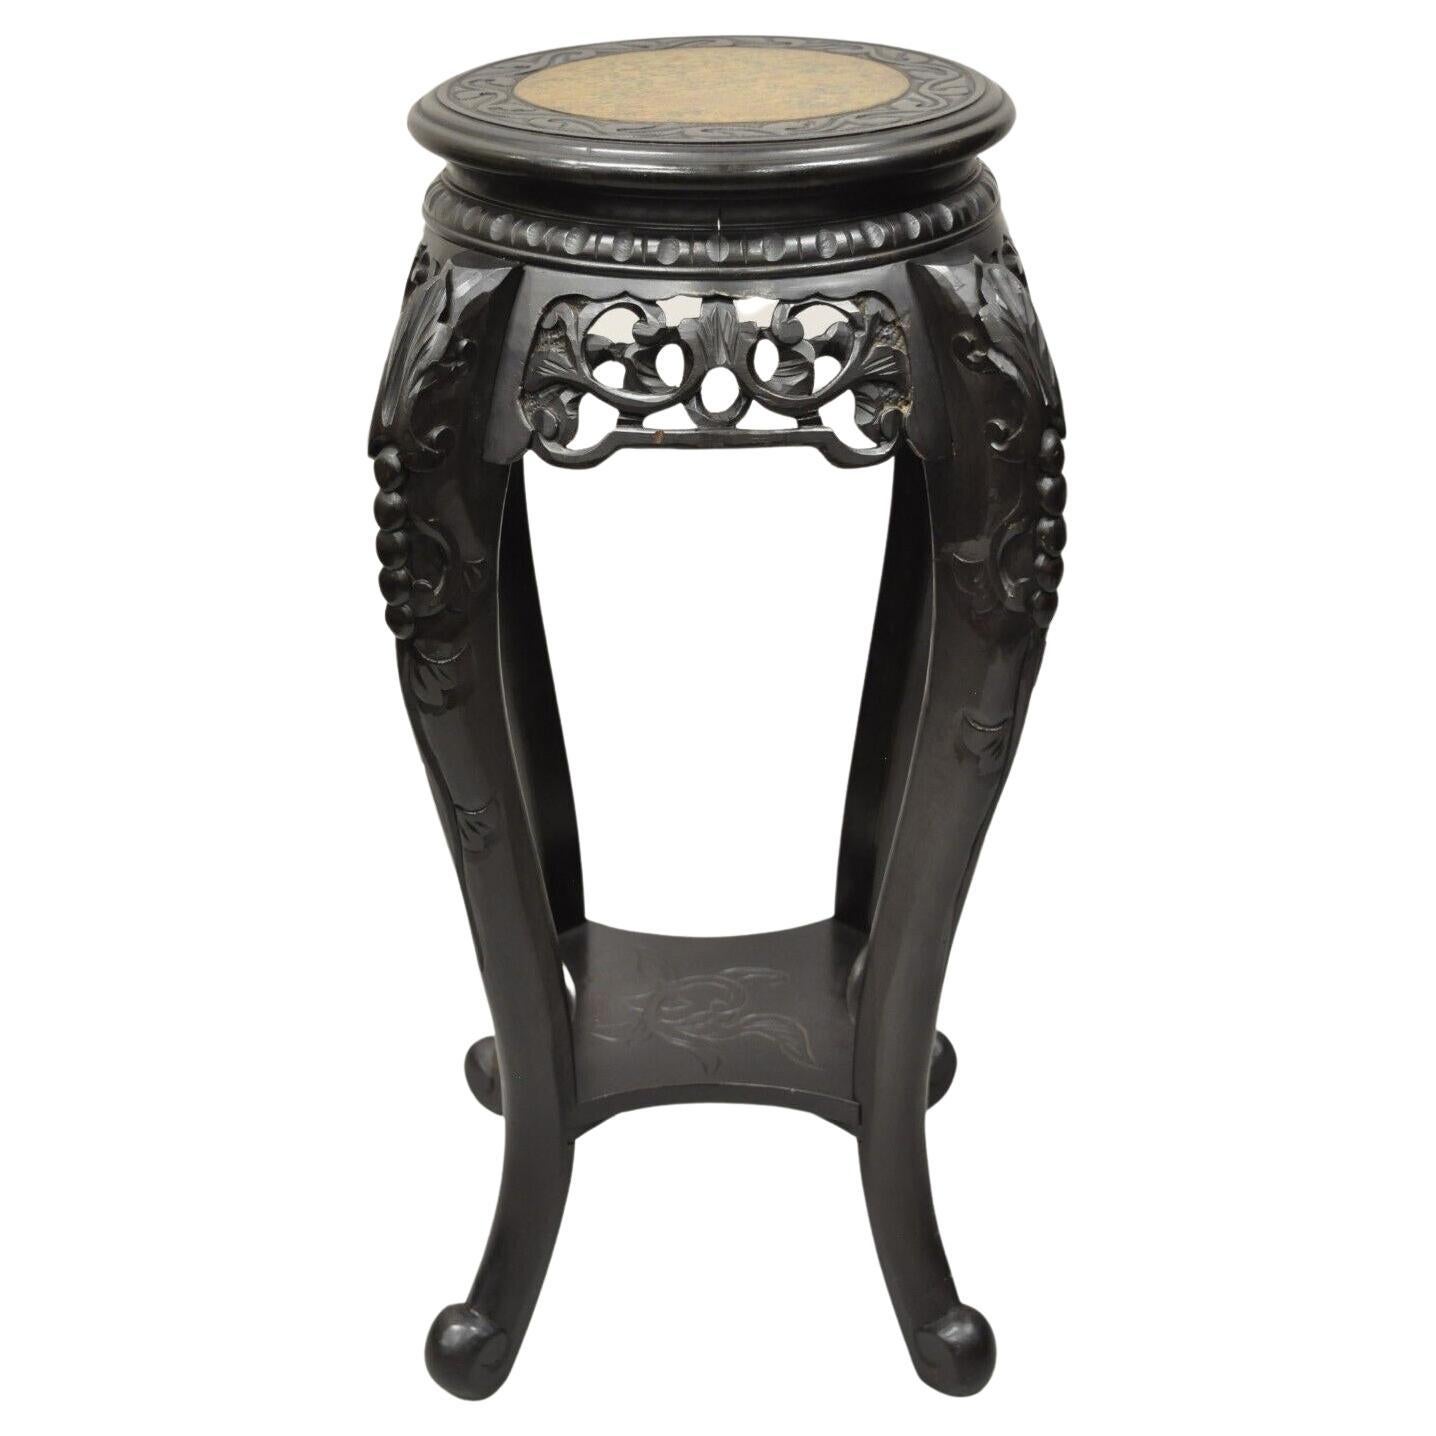 Japanese Carved Wood Black Ebonized Plant Stand Side Table Lacquer Top